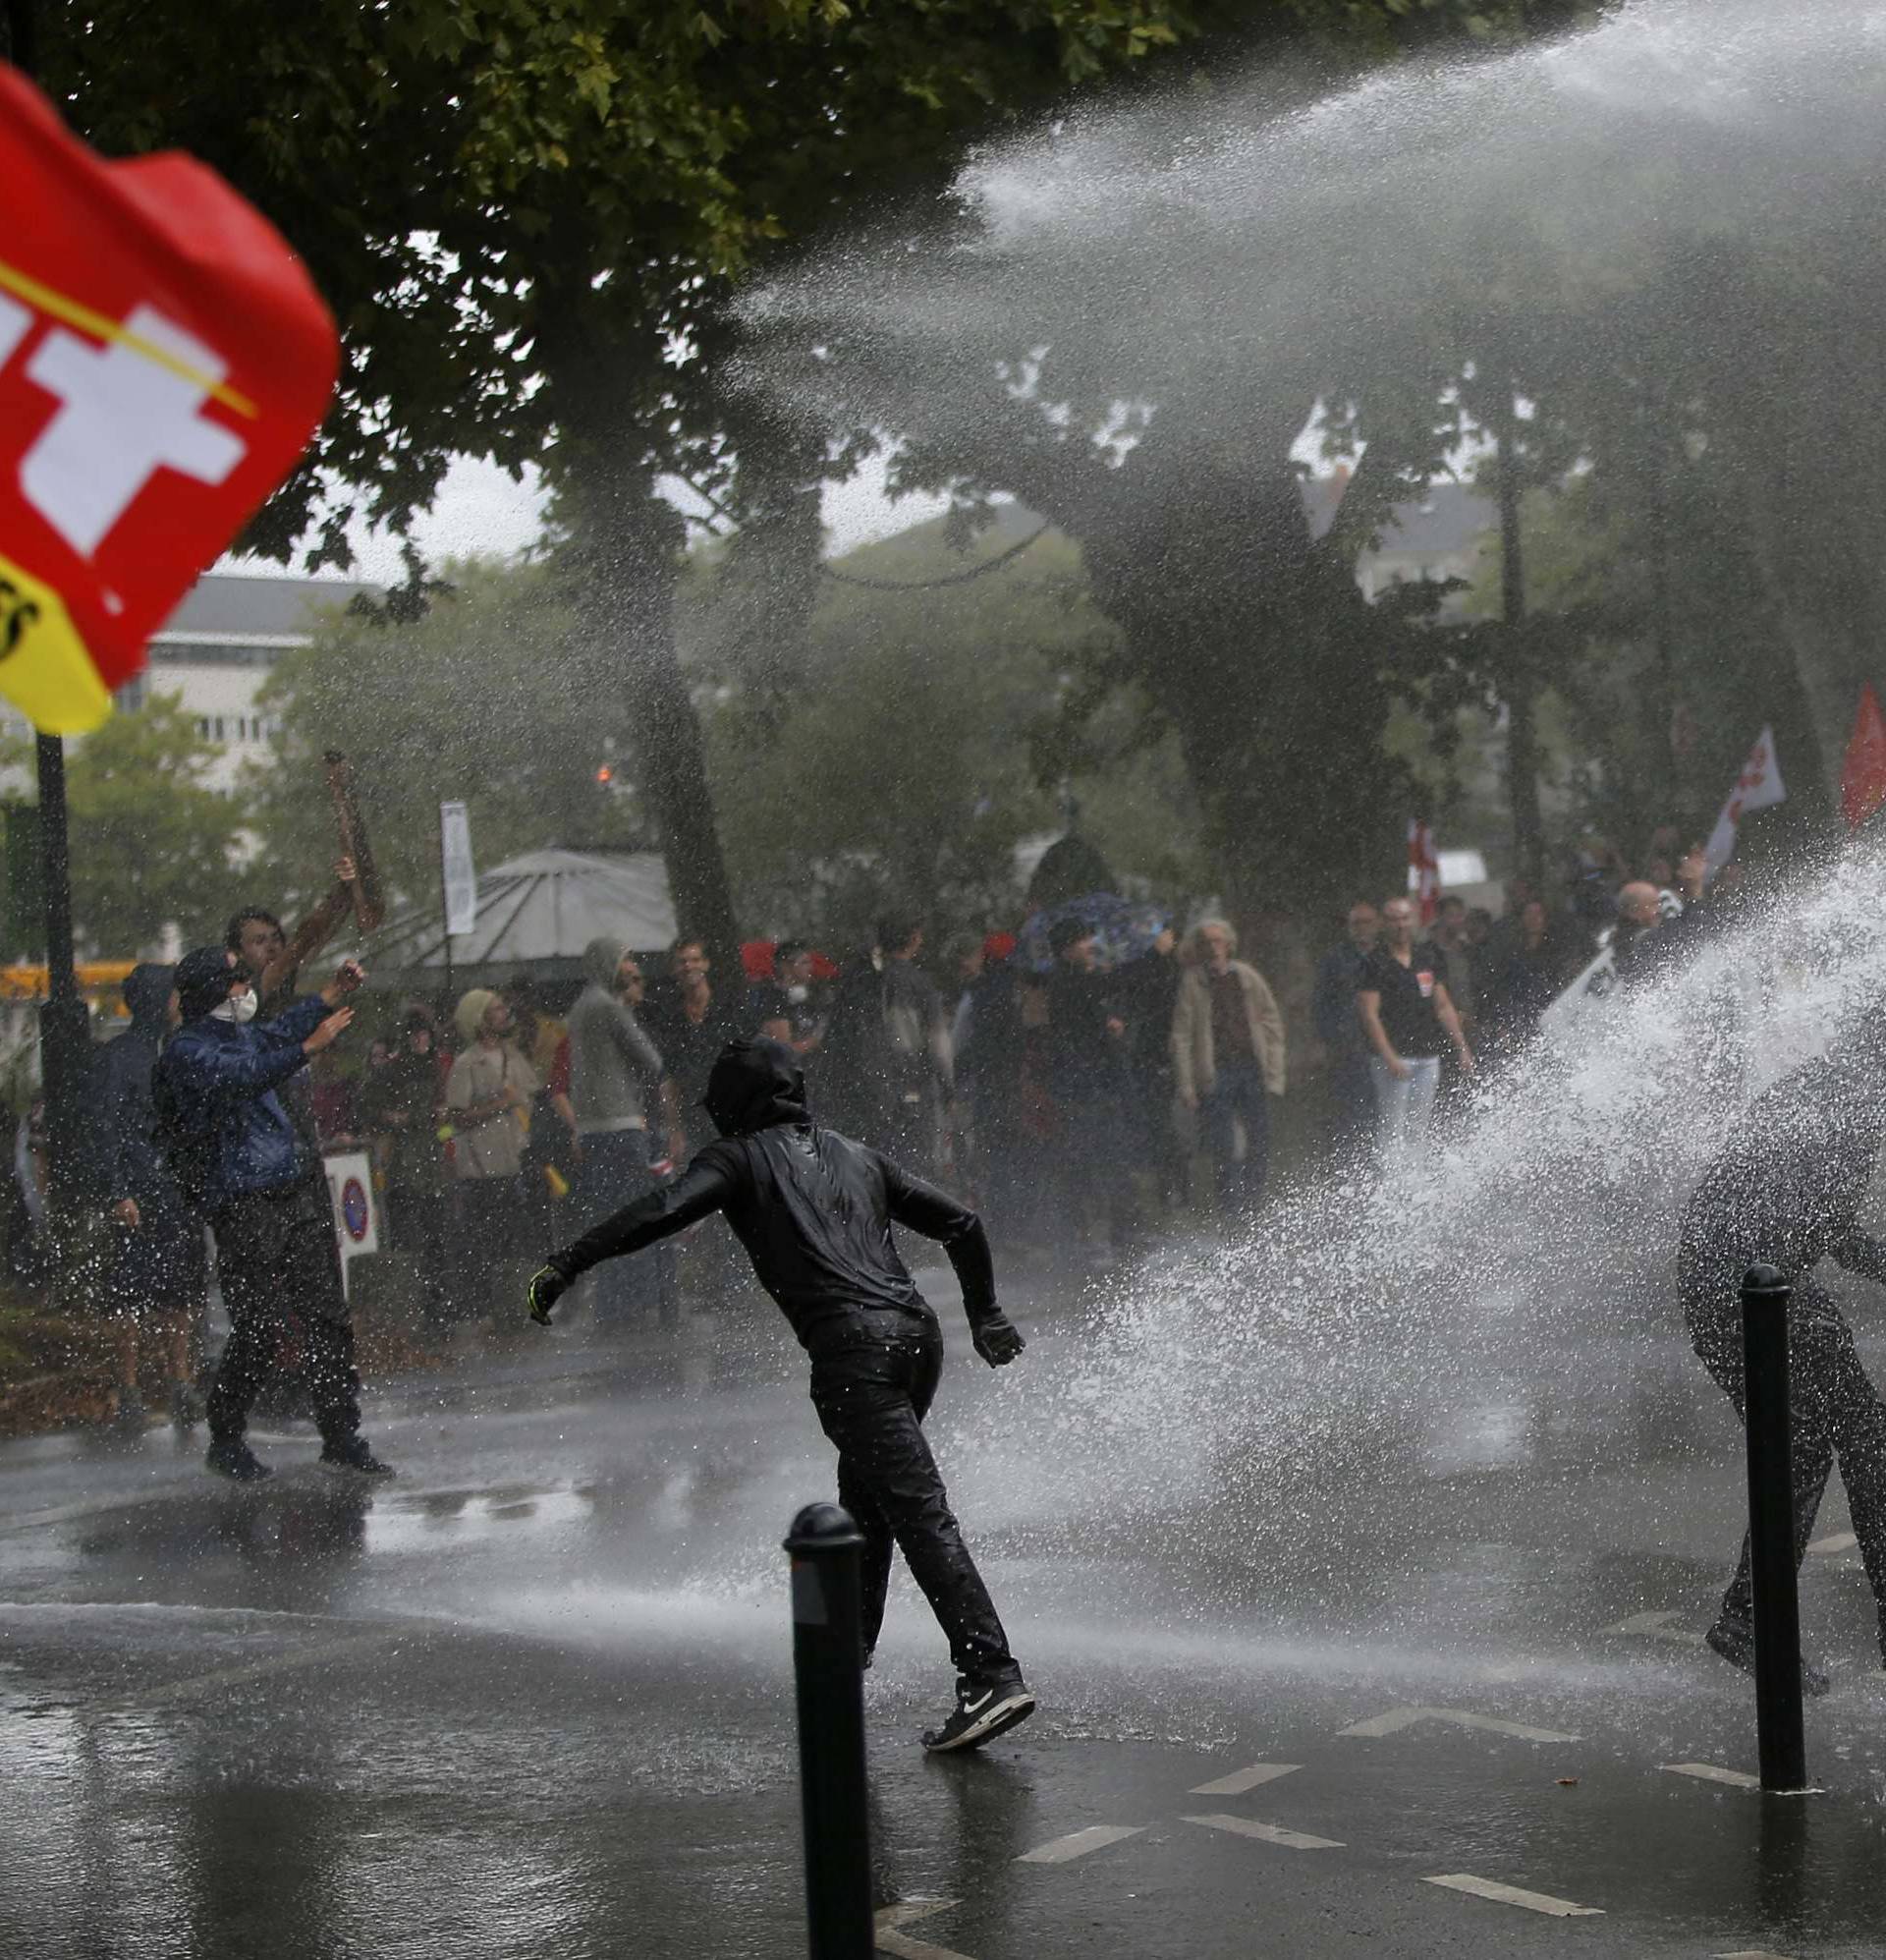 Demonstrators are sprayed by a water canon during clashes with French riot police at a march in Nantes